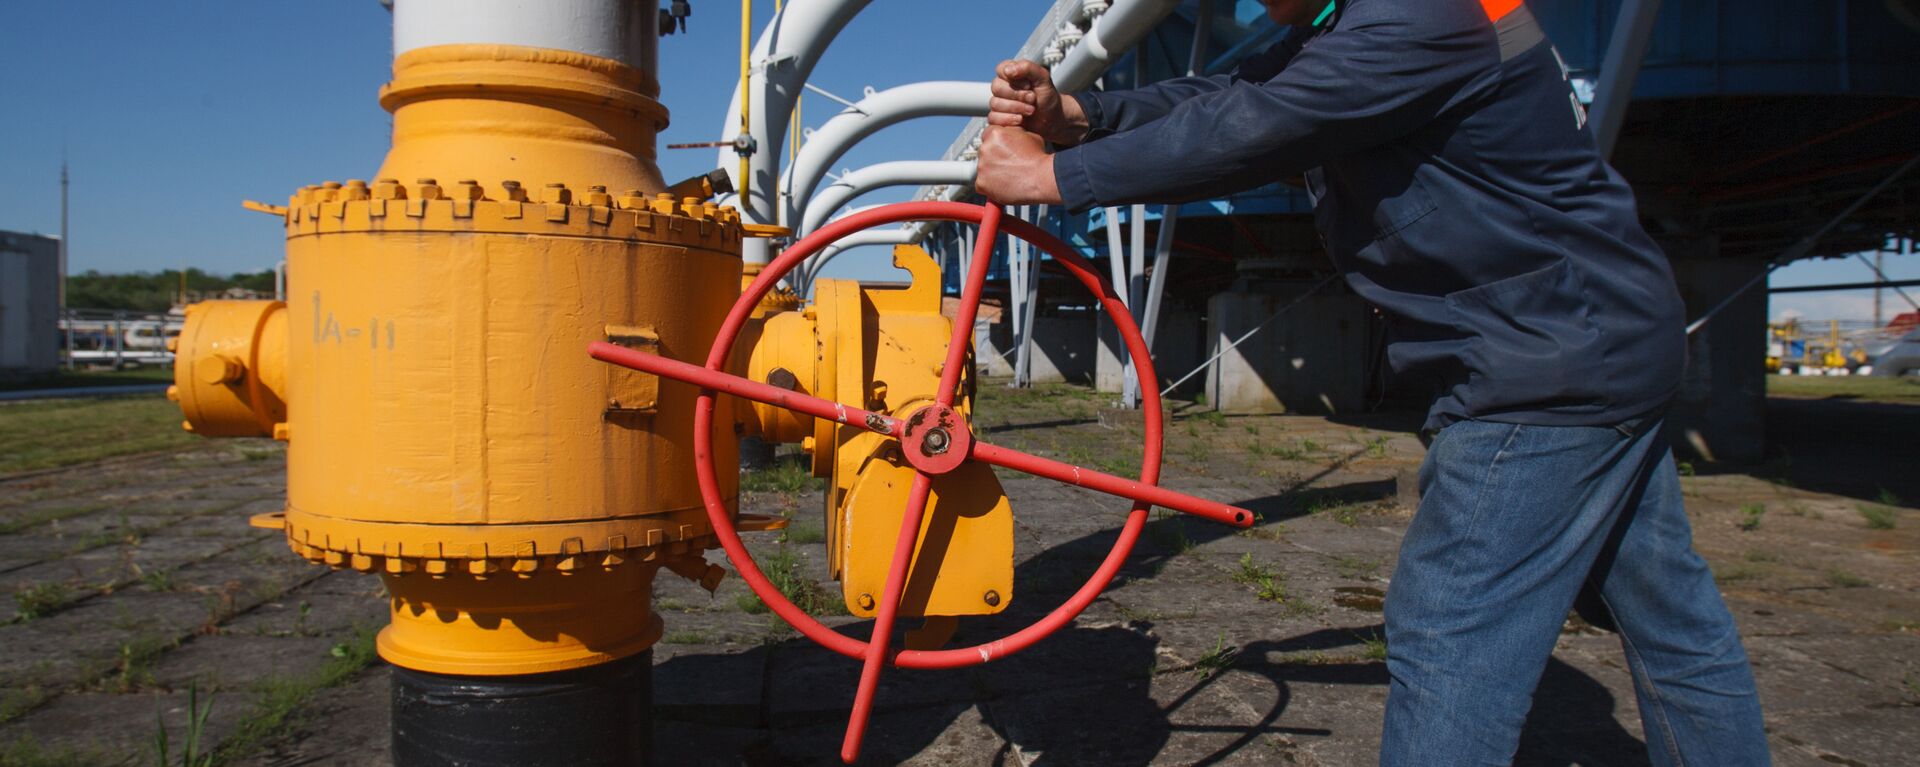 An employee tightens the valve on a pipeline at the Bilche-Volytsko-Uherske underground gas storage facility, the largest in Europe, not far from the village of Bilche village, in the Lviv region of western Ukraine, on May 21, 2014 - Sputnik International, 1920, 06.08.2022